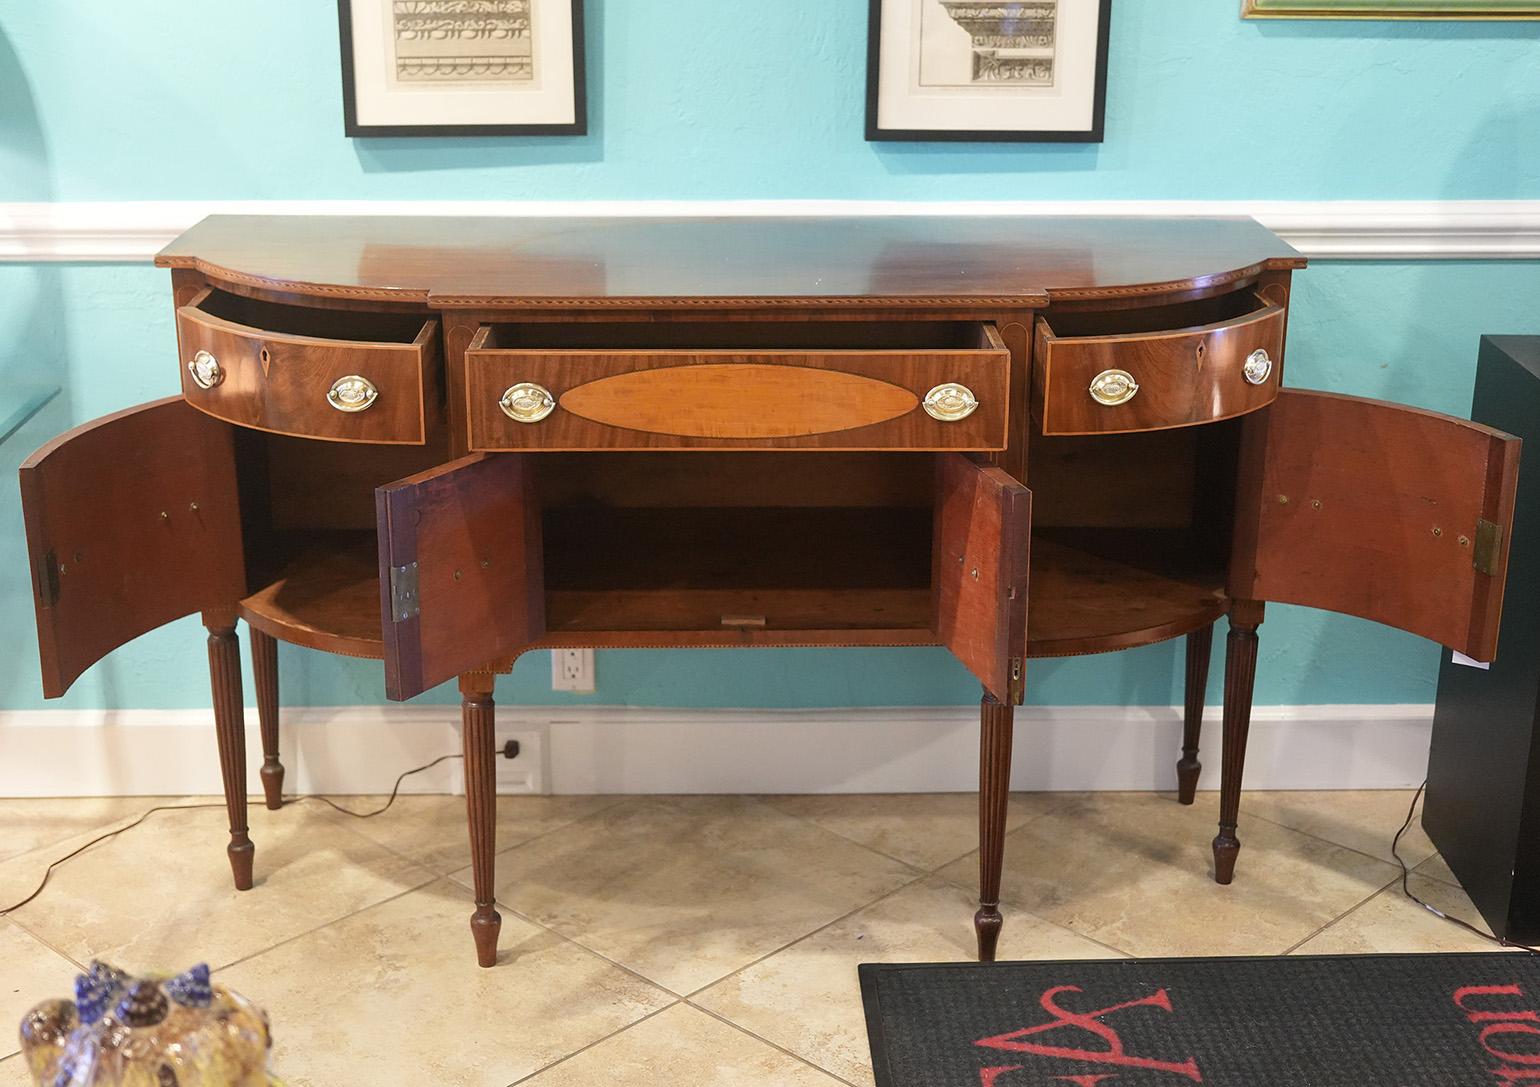 Beautifully inlaid mahogany Sheraton North Shore, Massachusetts American sideboard. Three drawers over four doors resting on turned and fluted legs. Central drawer has satinwood inlaid oval panel. Circa 1820s. 